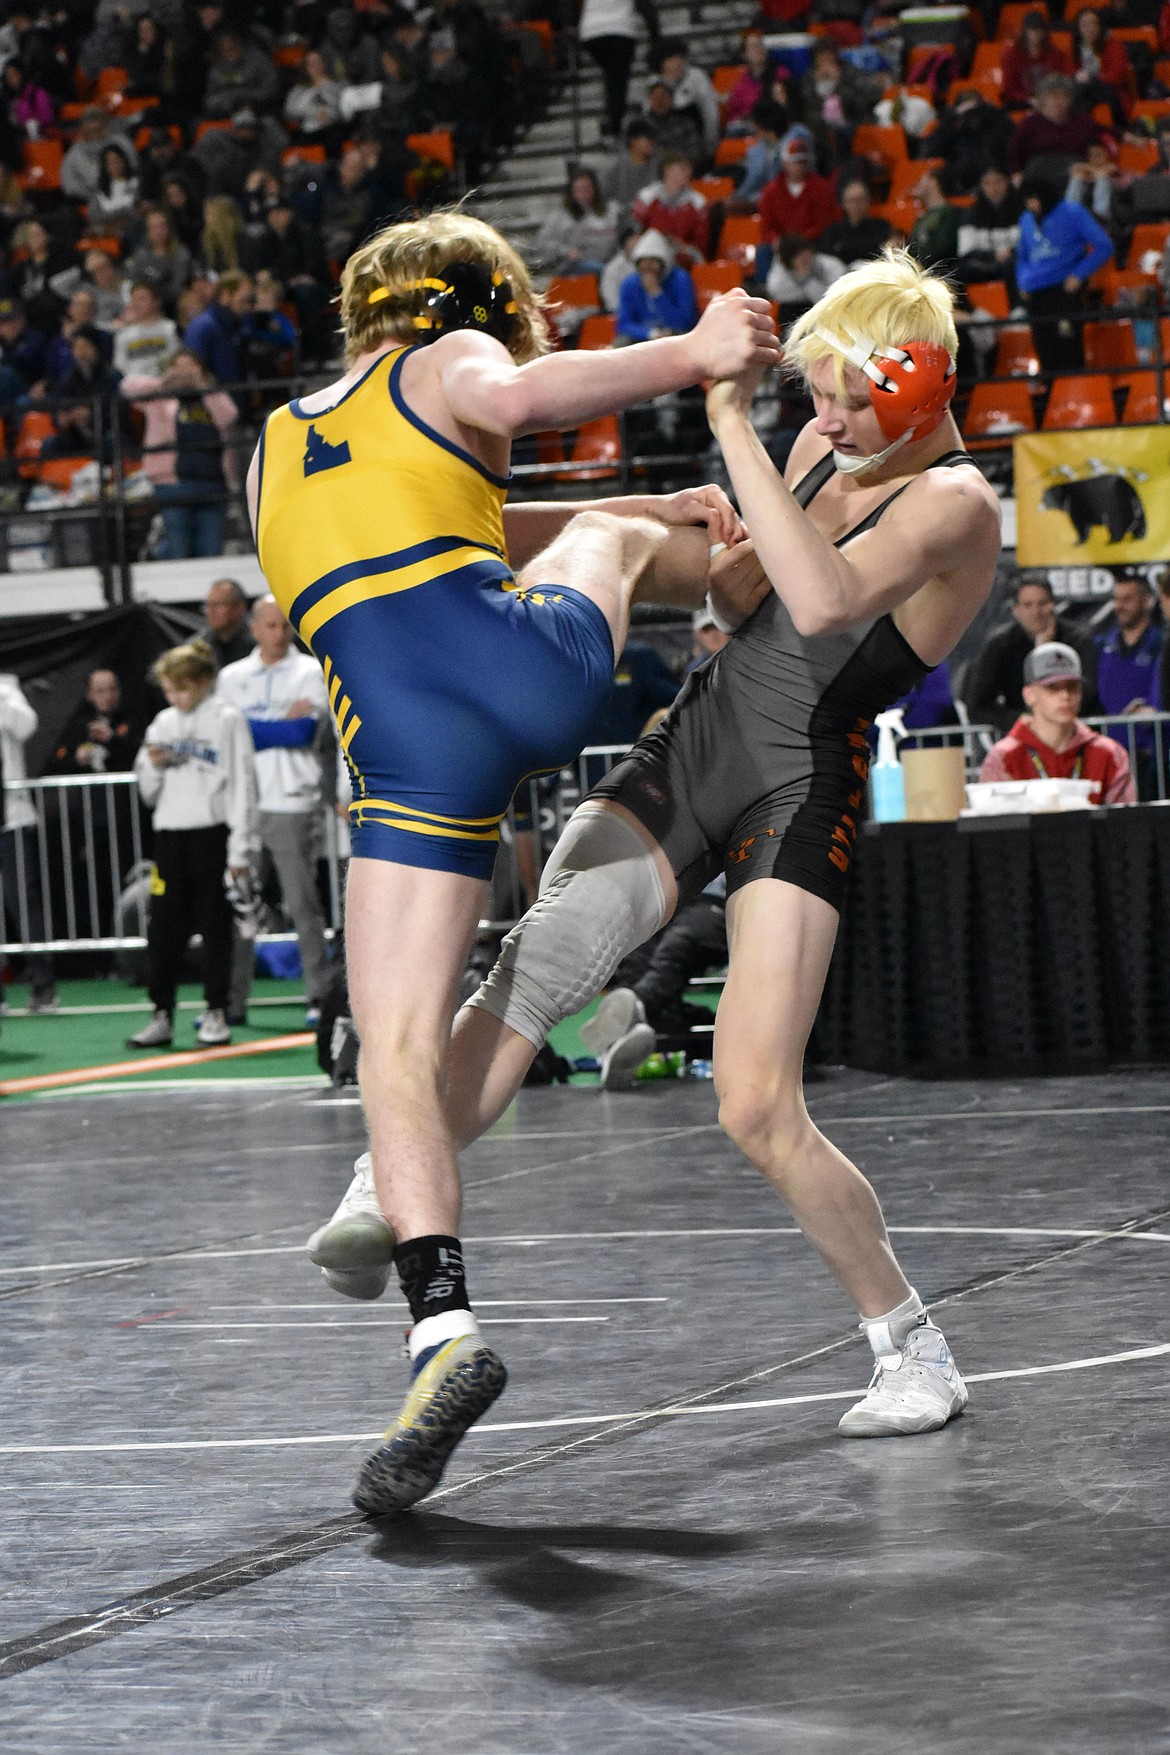 Photo by MOLLY MASON
Trey Smith, right, of Post Falls, beat Zac Kimes of Meridian 1-0 in the quarterfinals at 126 pounds Friday to advance to today's 5A semifinals at the state wrestling tournaments at Holt Arena in Pocatello.